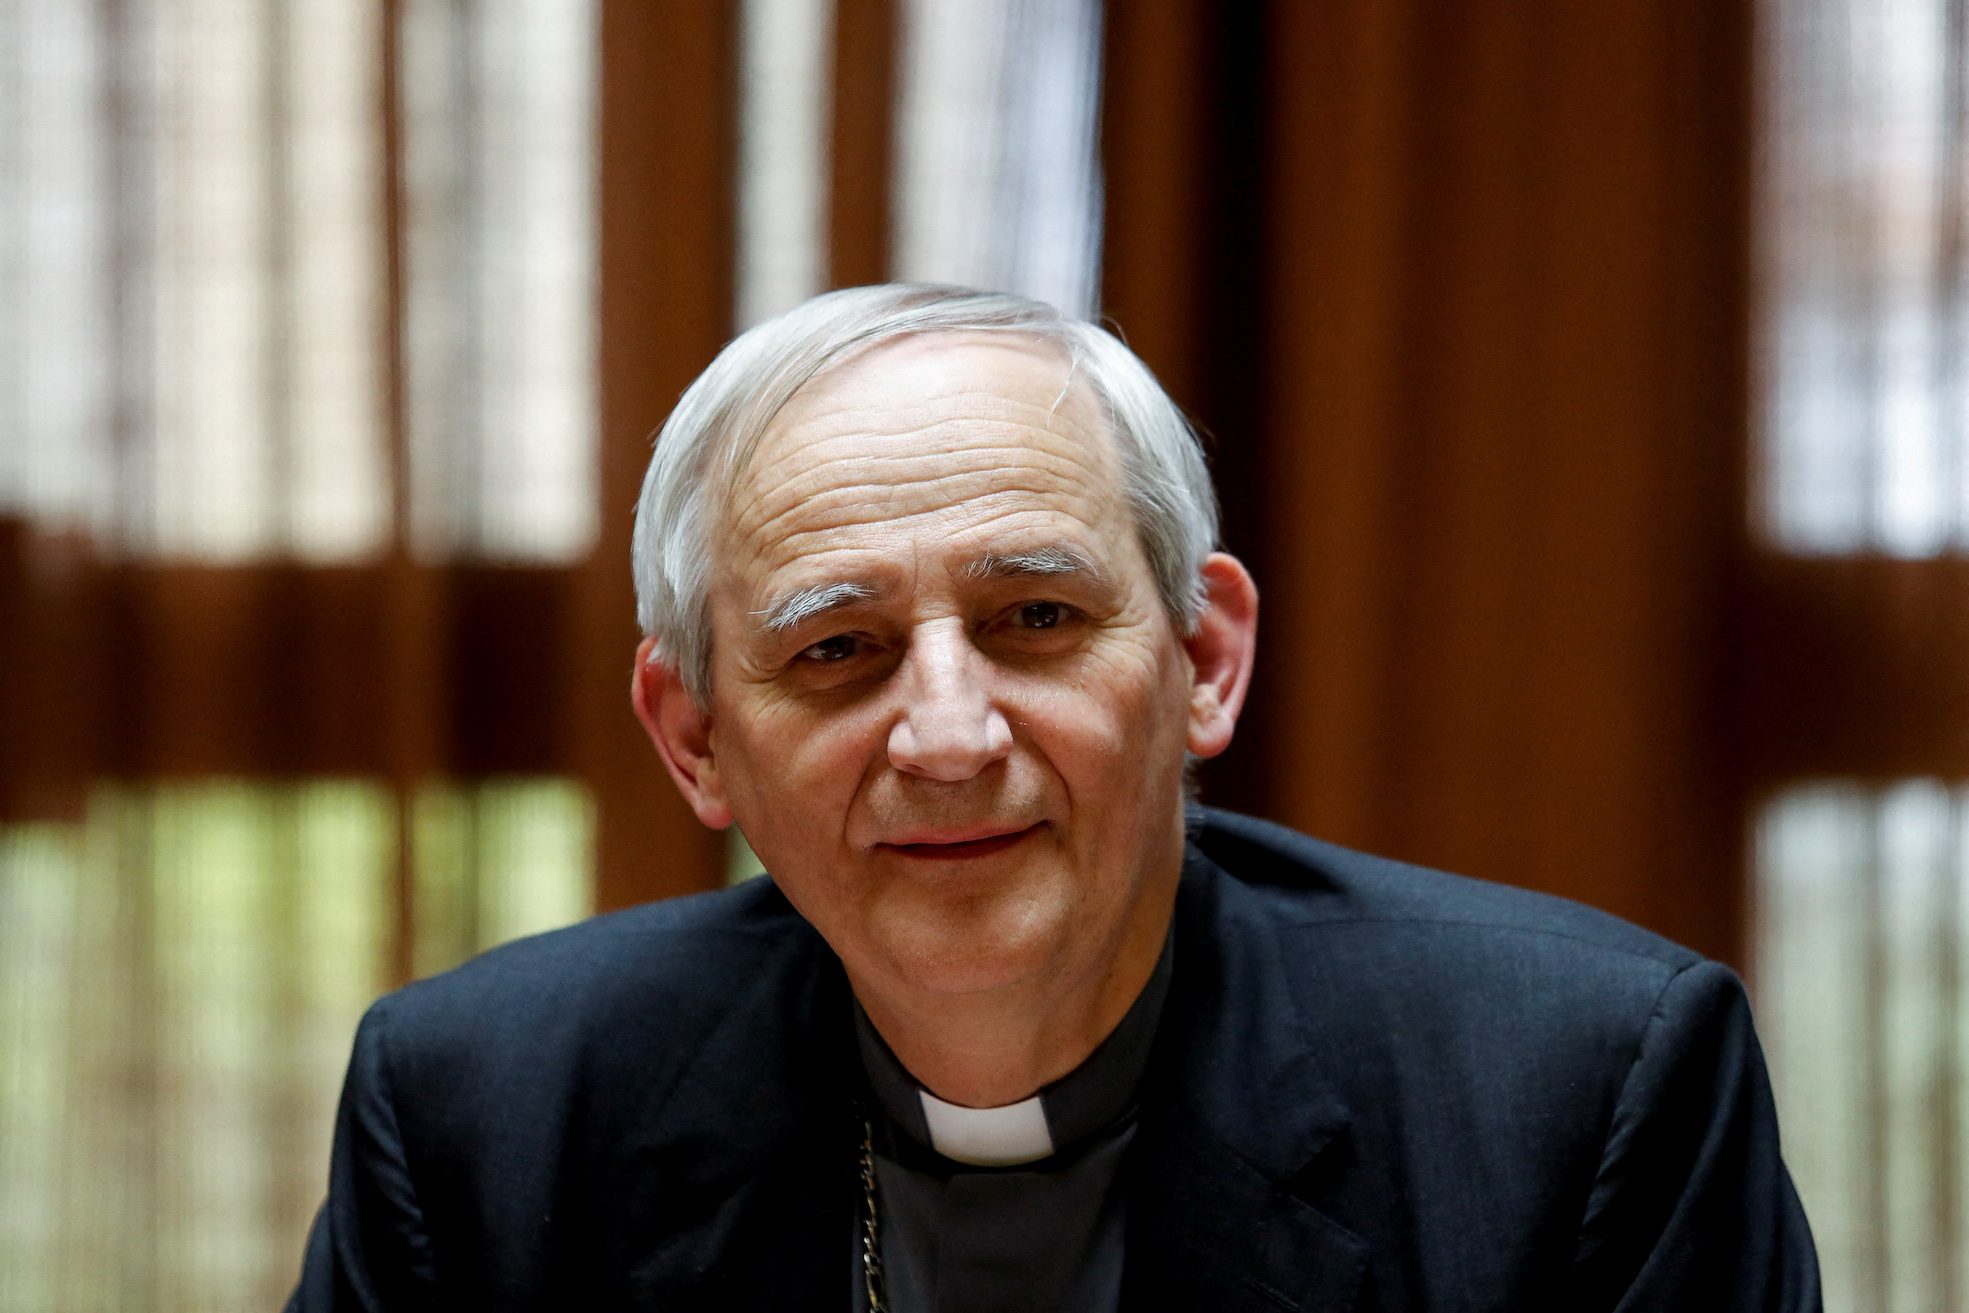 Papal envoy heads to Ukraine to ‘listen carefully’ to possible peace plans